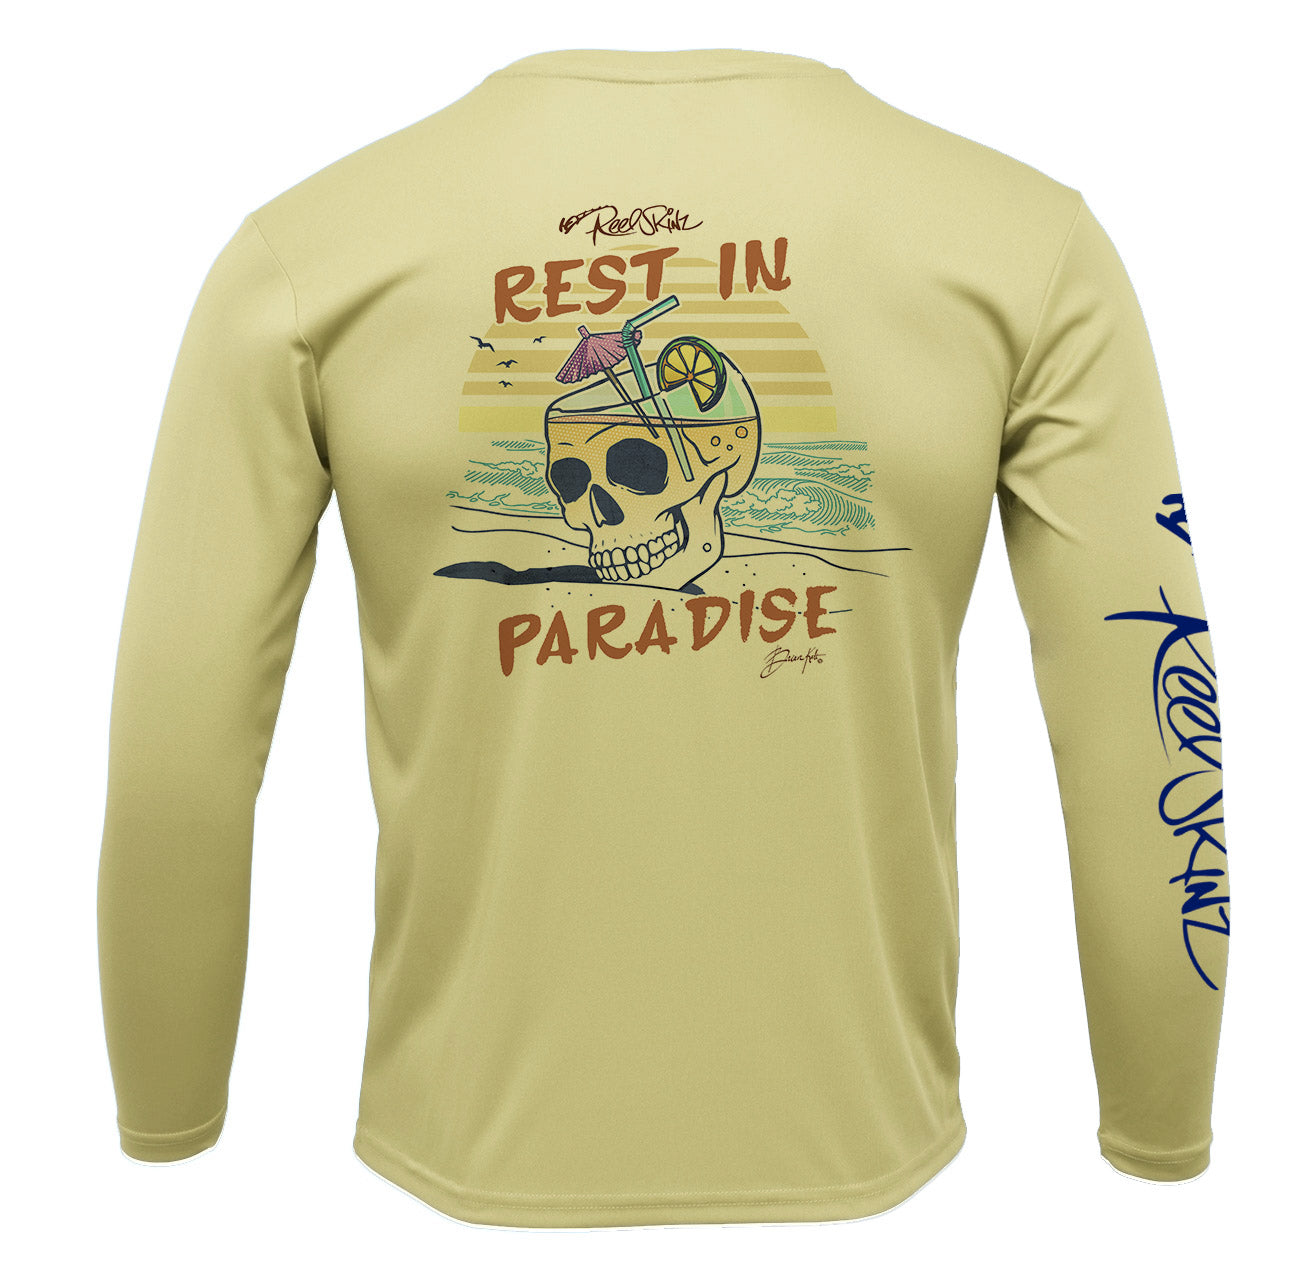 Rest in Paradise by Brian Kalt XS / Soft Coral / Mens Short Sleeve